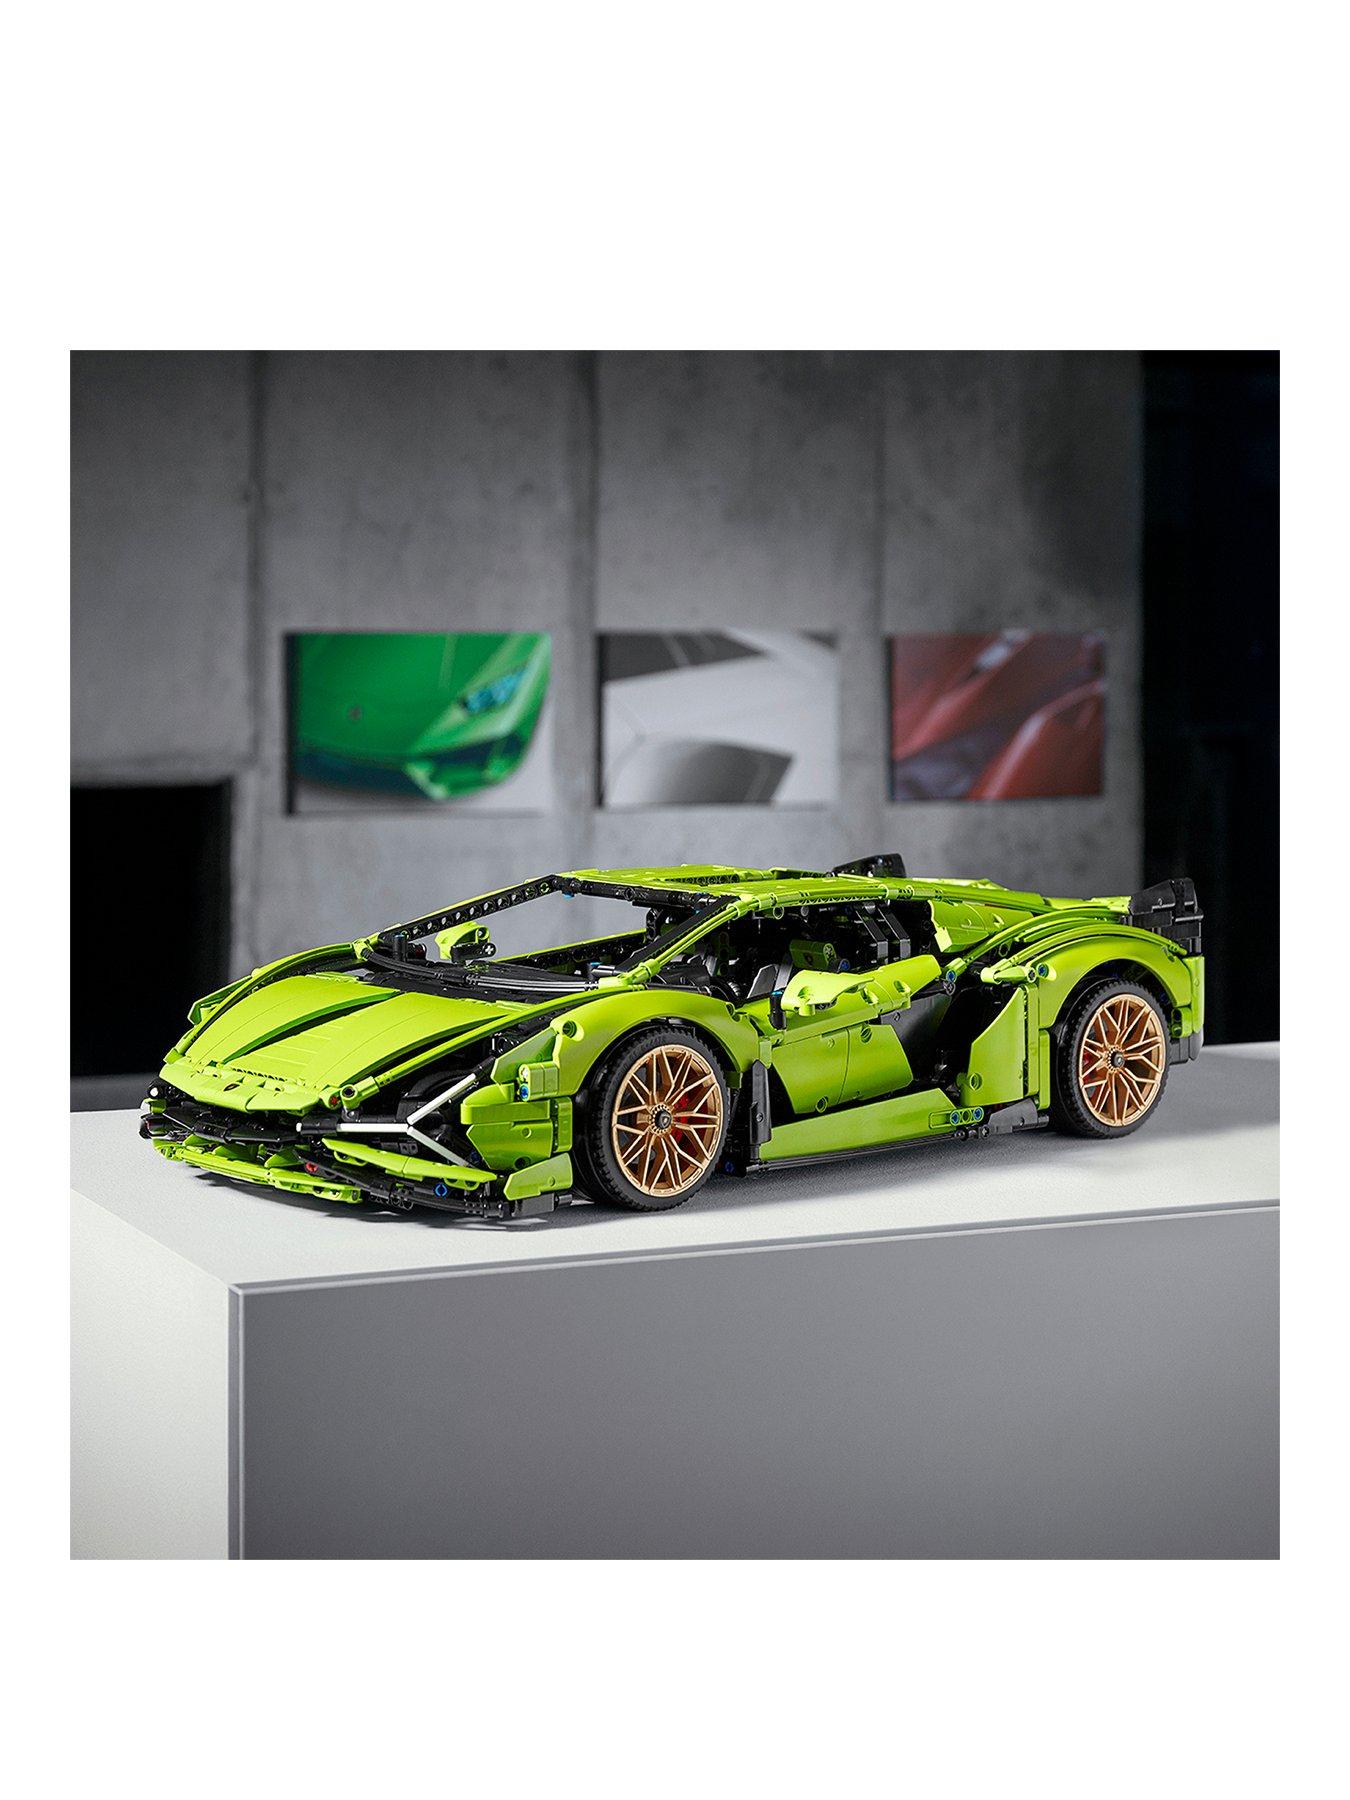  LEGO Technic Lamborghini Sián FKP 37 42115 Building Set -  Classic Super Car Model Kit, Exotic Eye-Catching Display, Home or Office  Décor, Ideal for Adults or Car Enthusiasts : Toys & Games